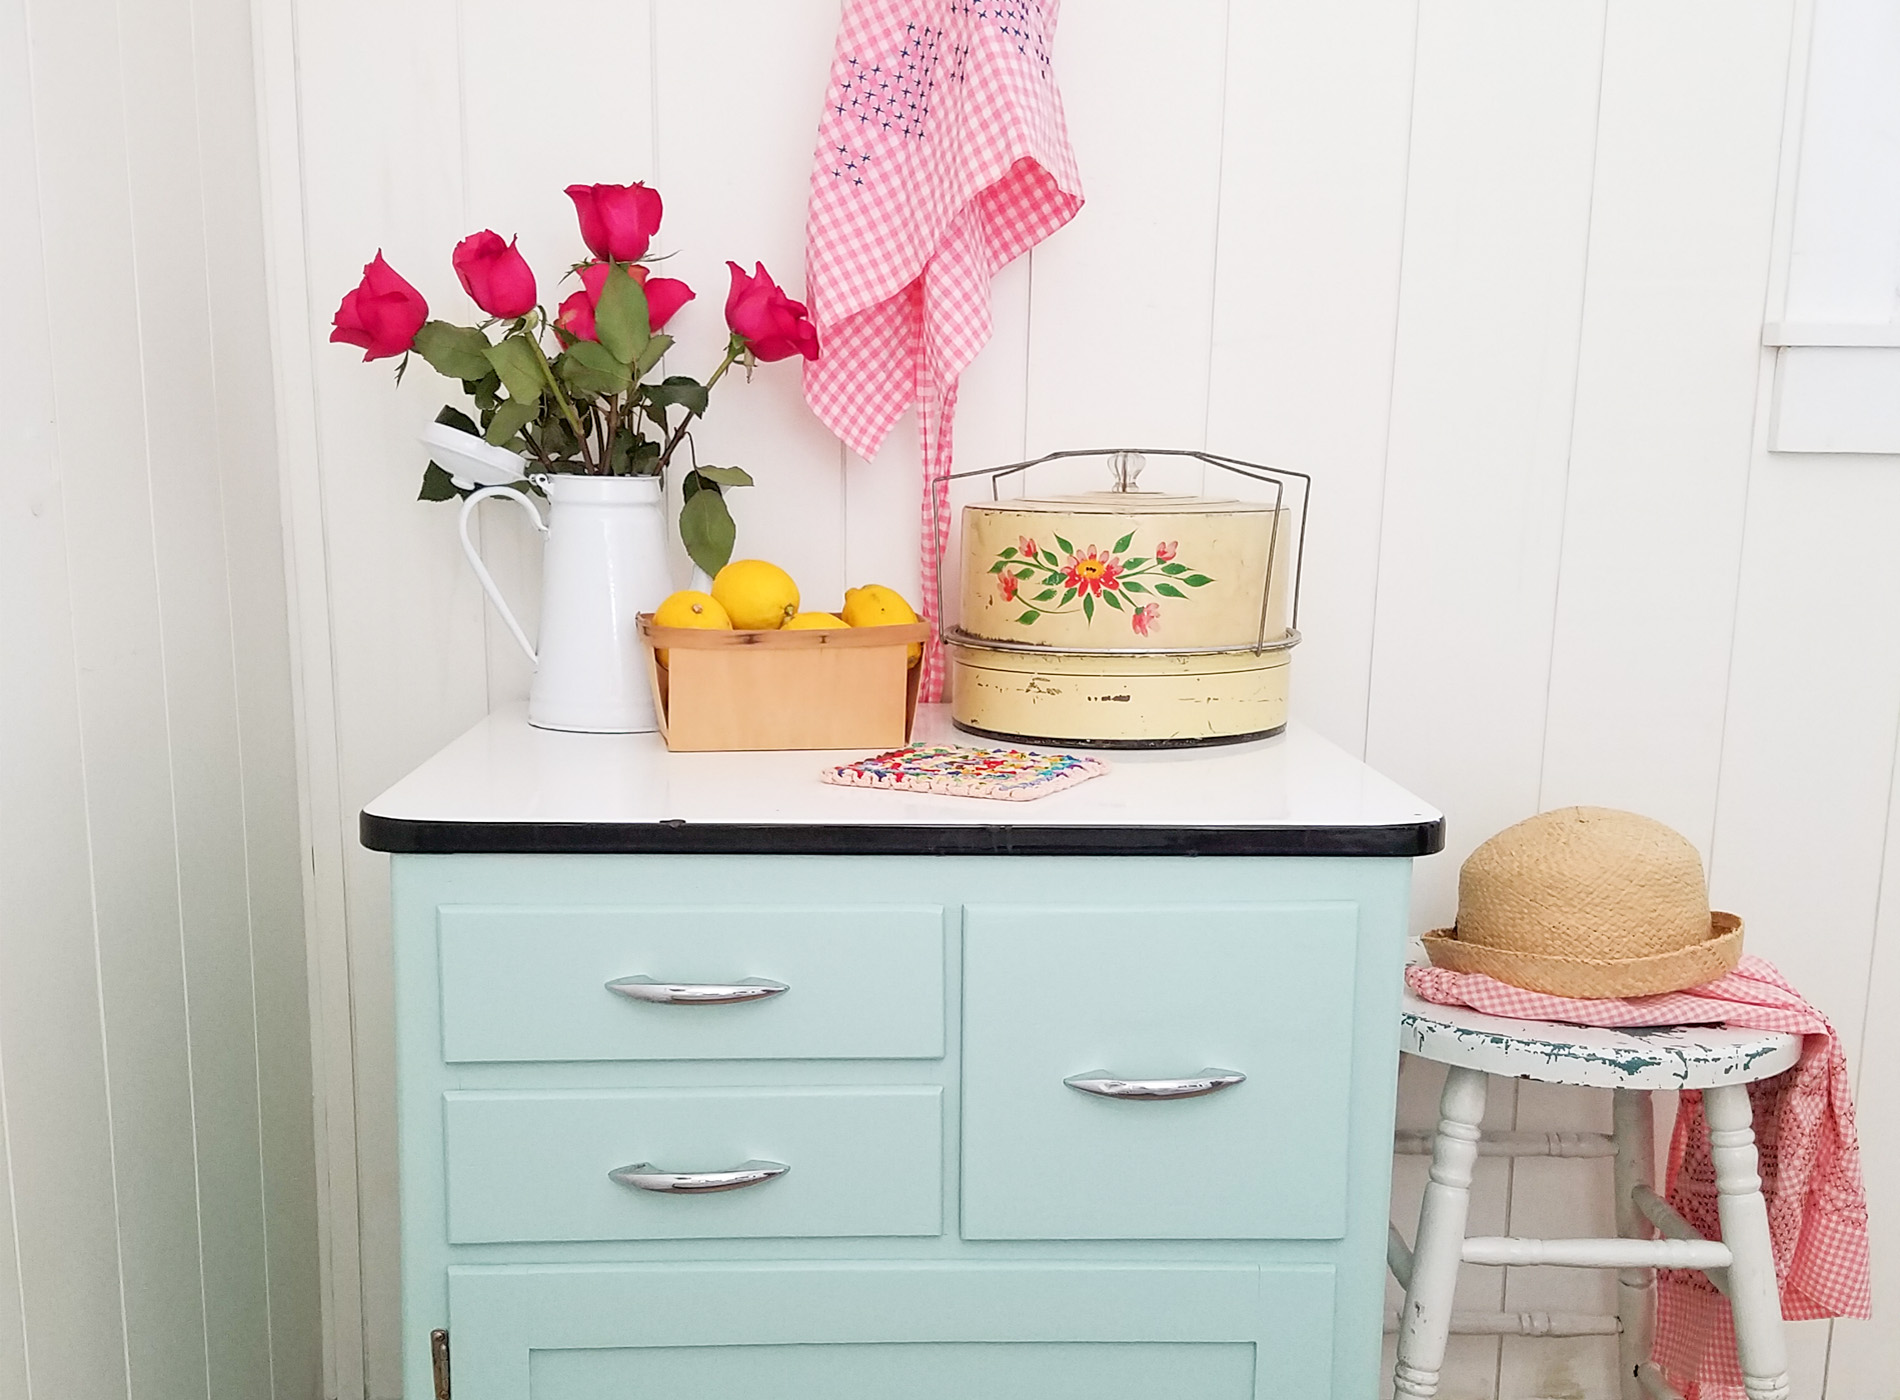 Featured Enamel Cabinet Makeover by Prodigal Pieces | prodigalpieces.com